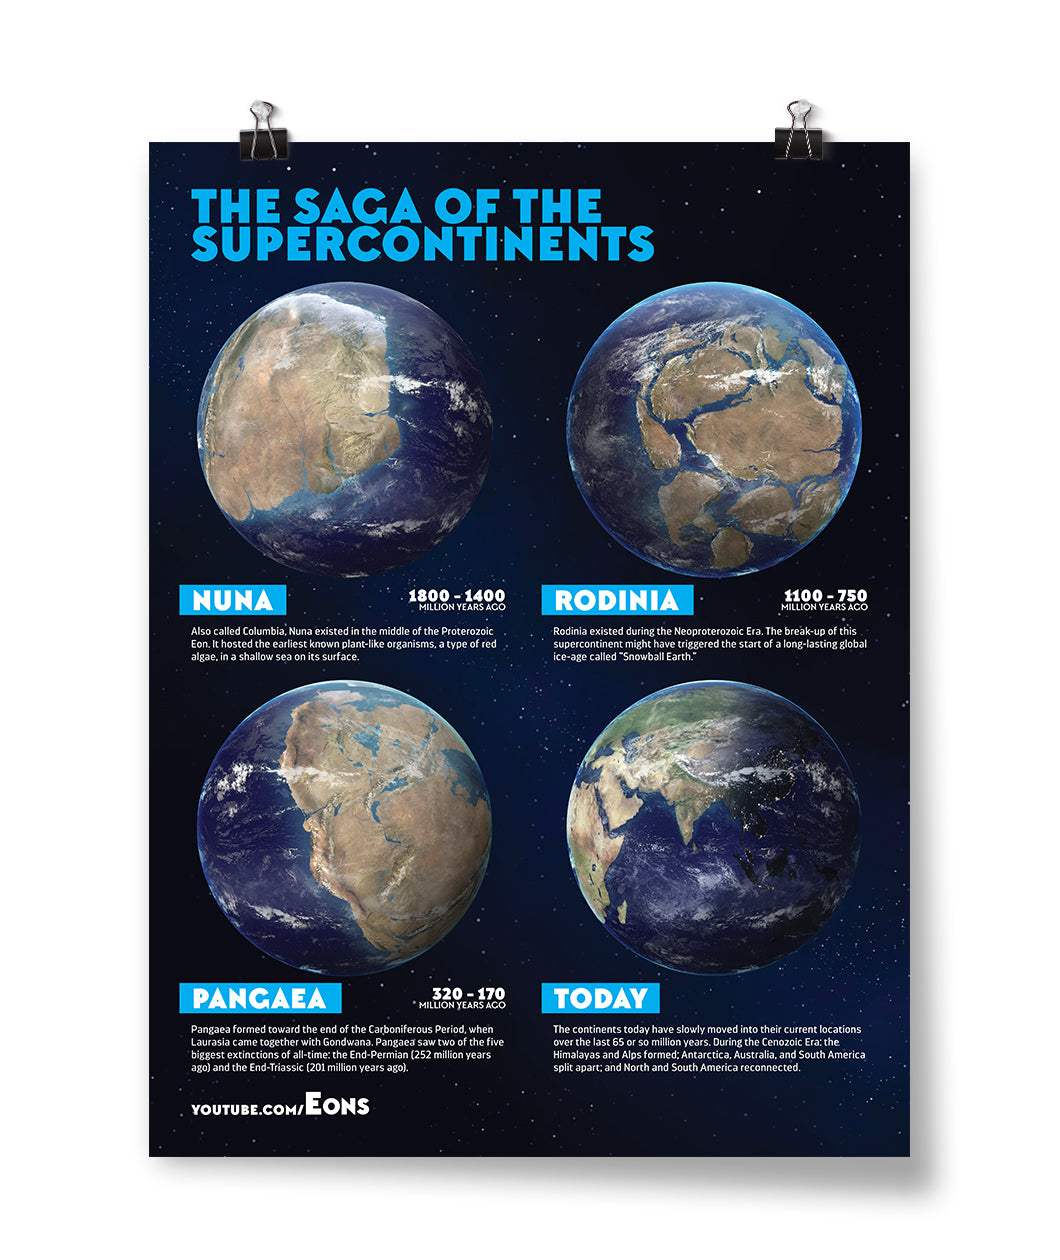 Vertical rectangular poster with a night sky background. “The Saga of the Supercontinents” is written in blue sans serif font at the top. Below are four different photos of the history of supercontinents on Earth - from Eons